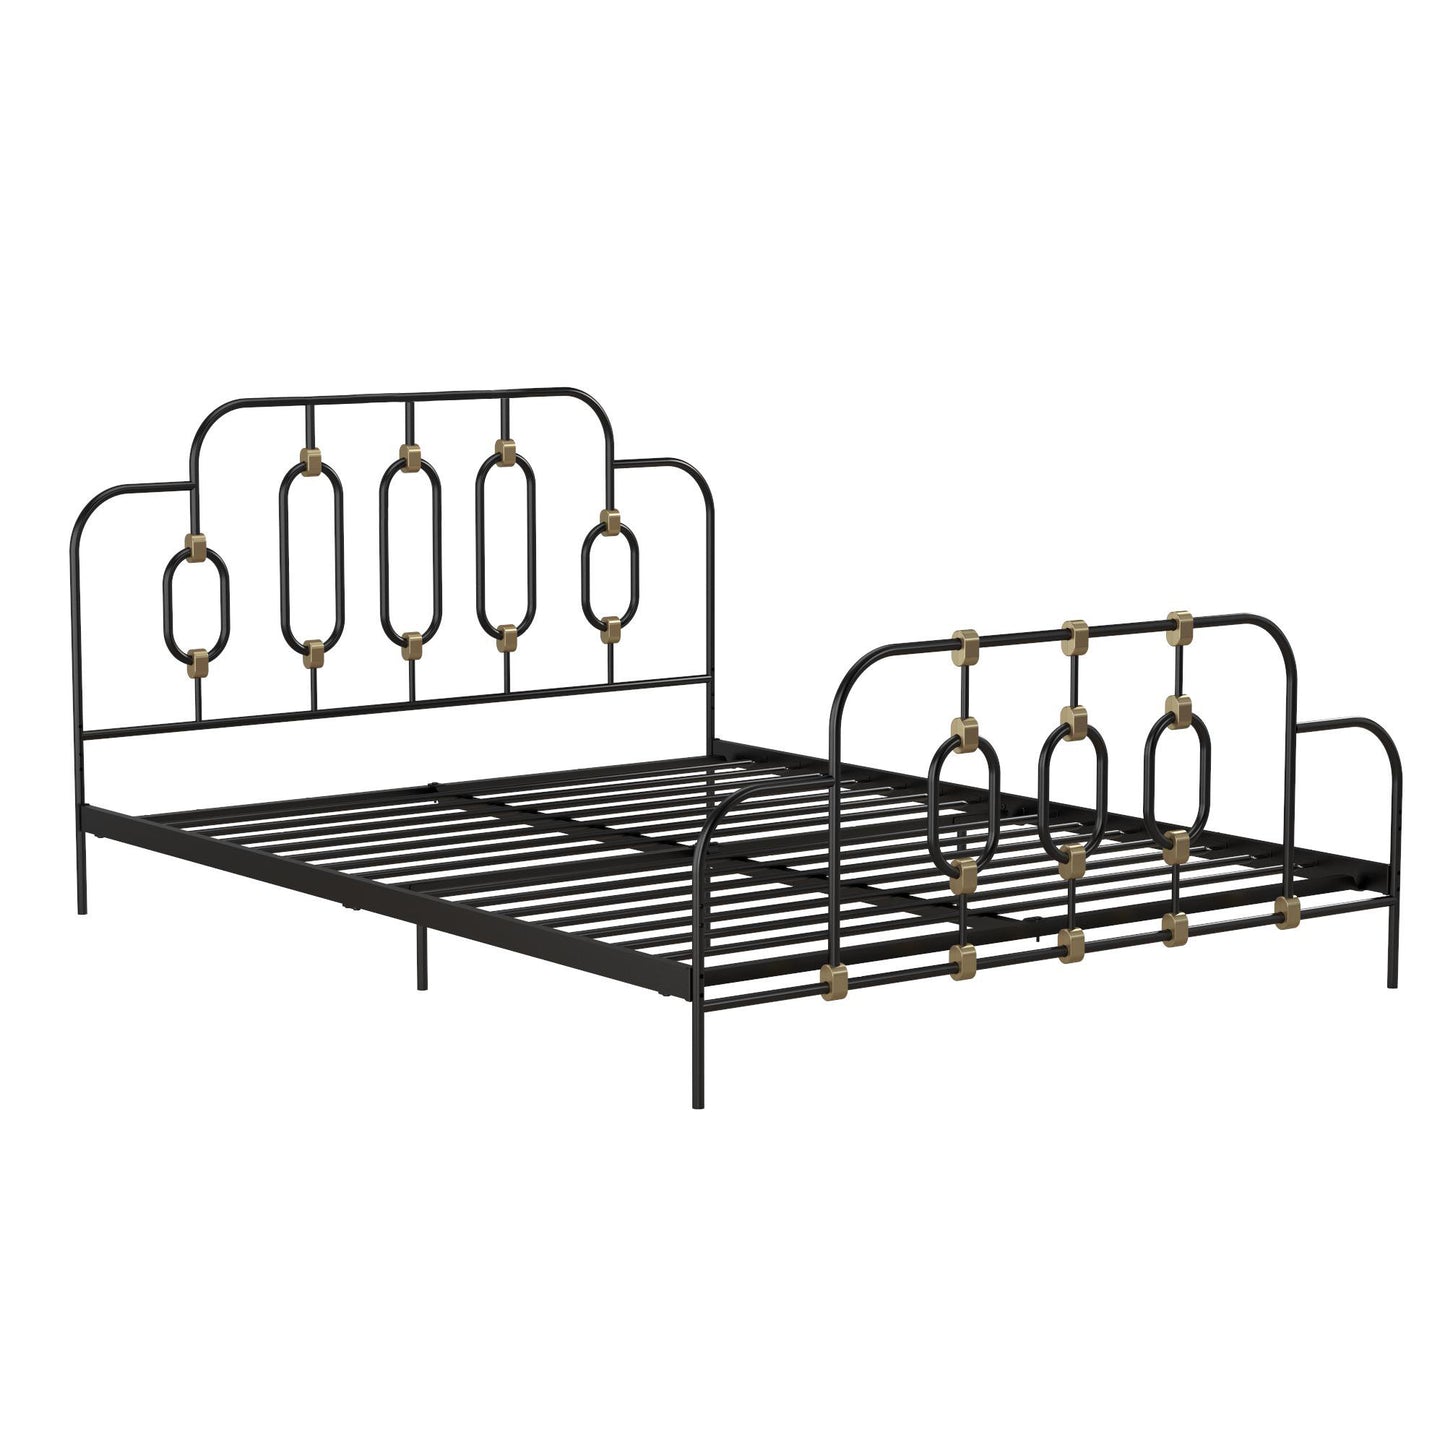 Ola Metal Bed, Black with Gold Detail, Full